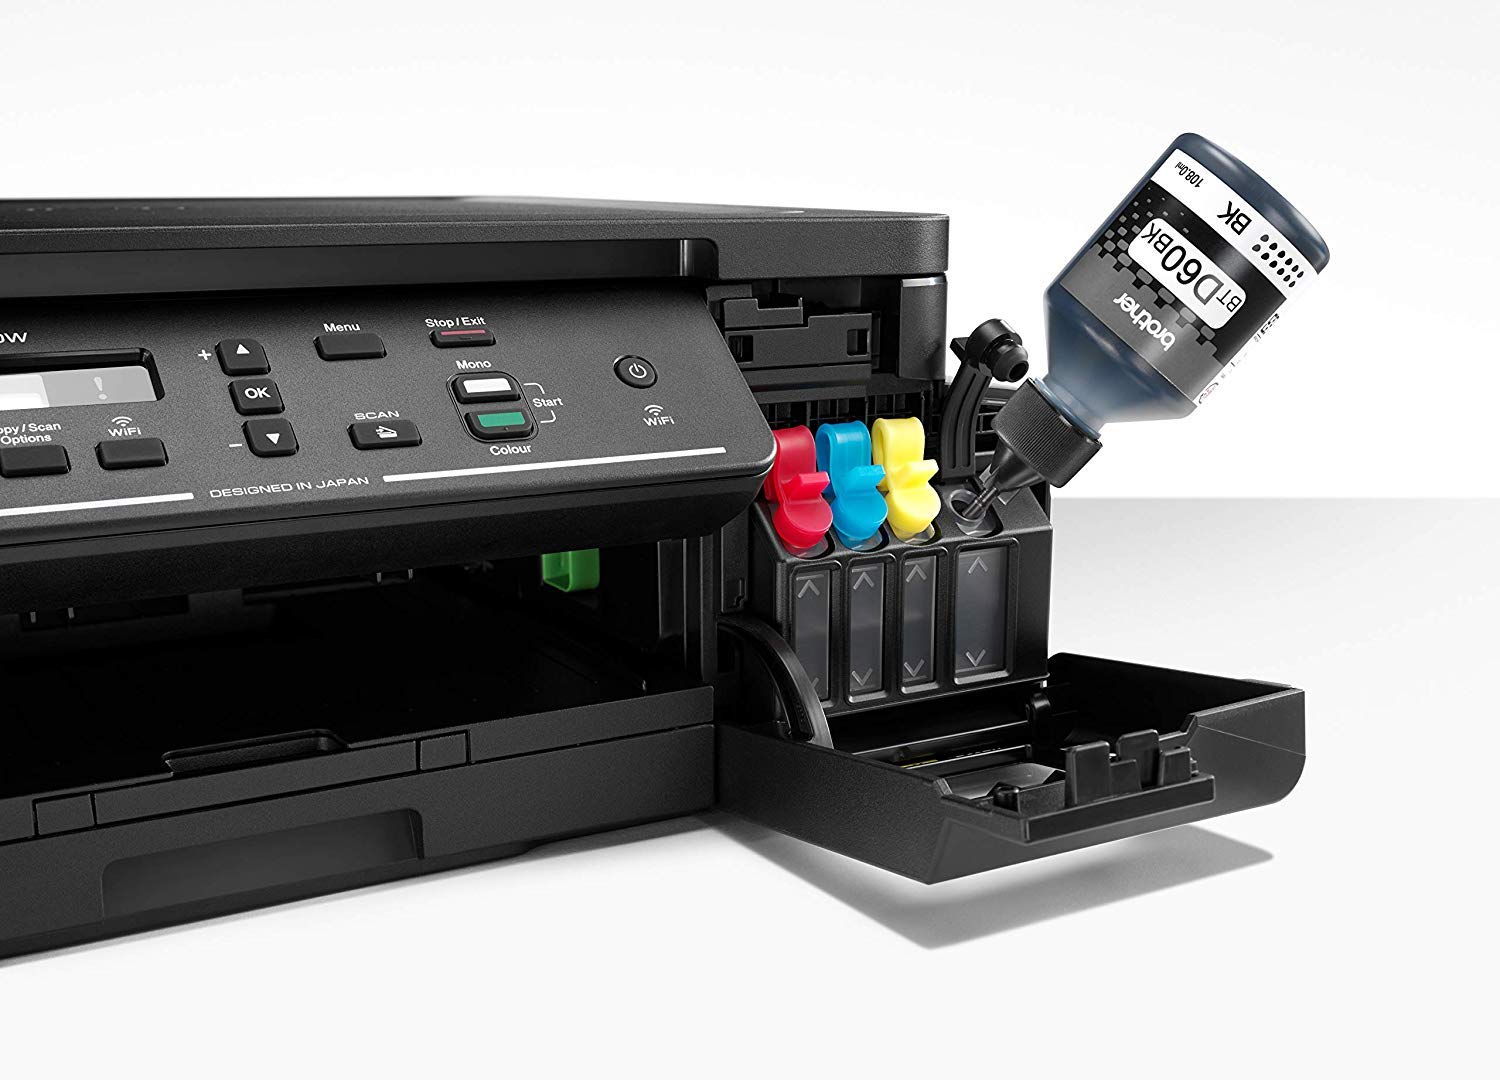 How To Check Brother Printer Ink Levels